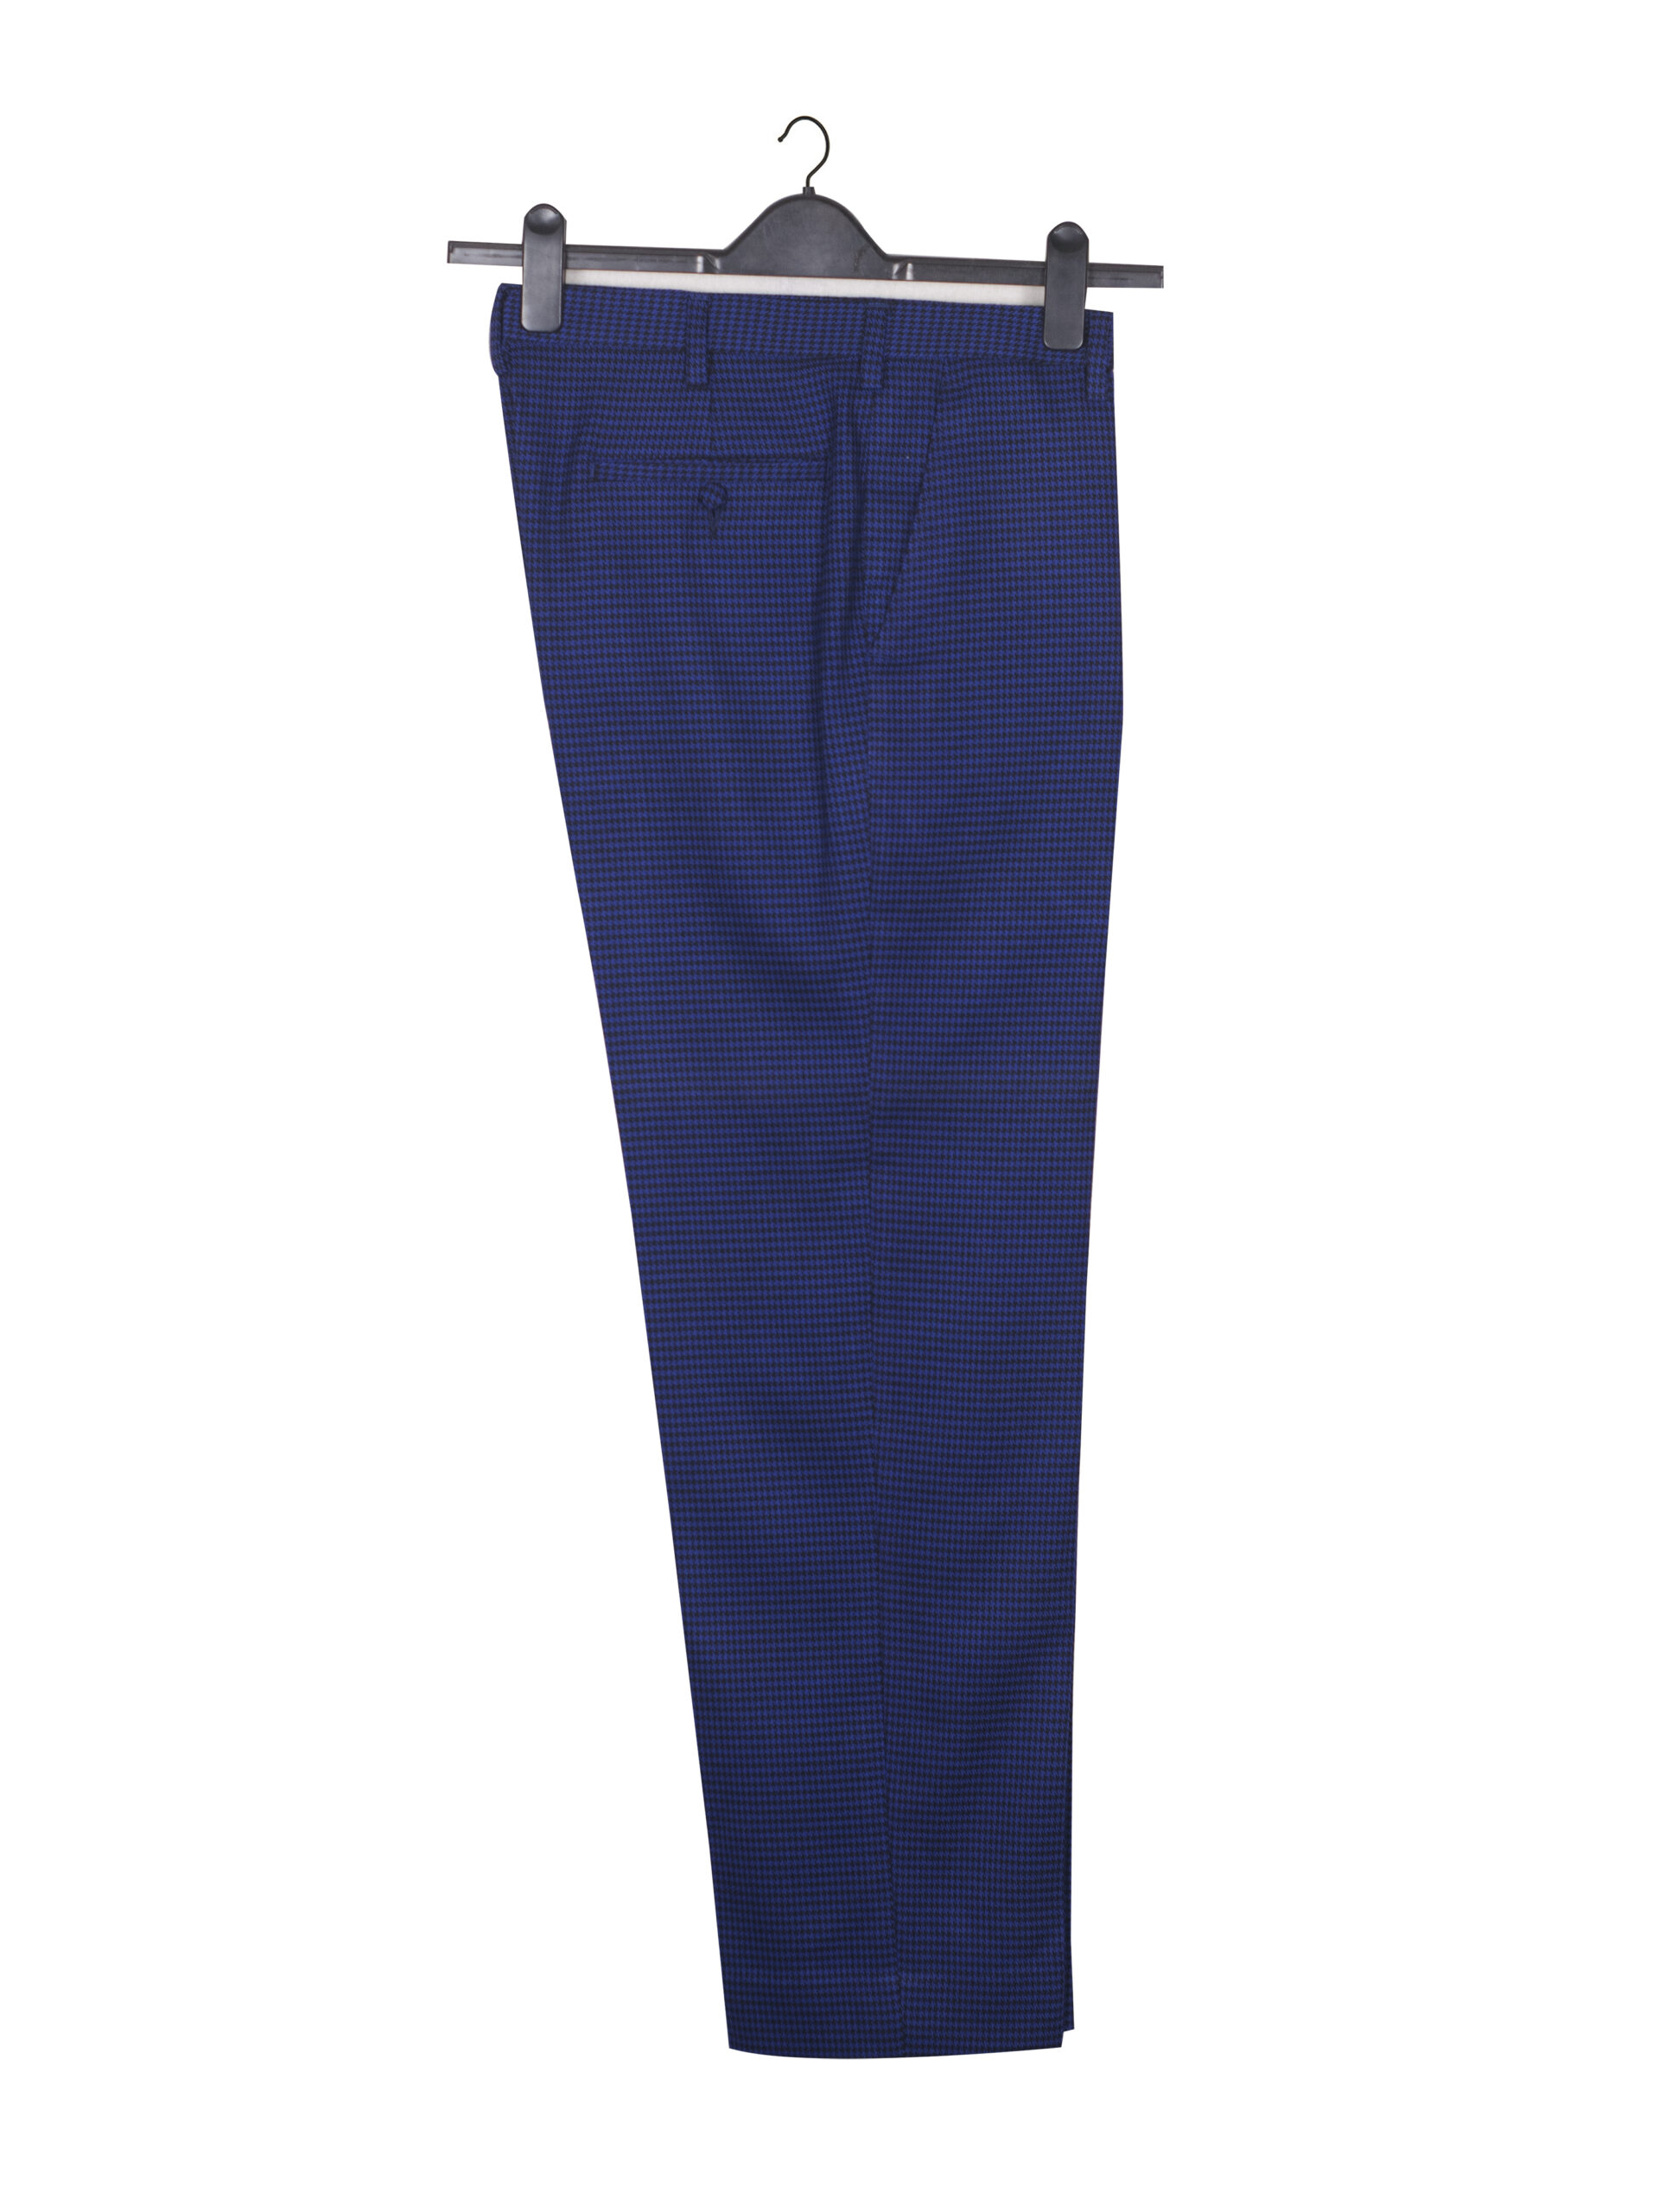 Relco Mens Classic Sta Prest Trousers (Navy) 28R : Amazon.co.uk: Fashion